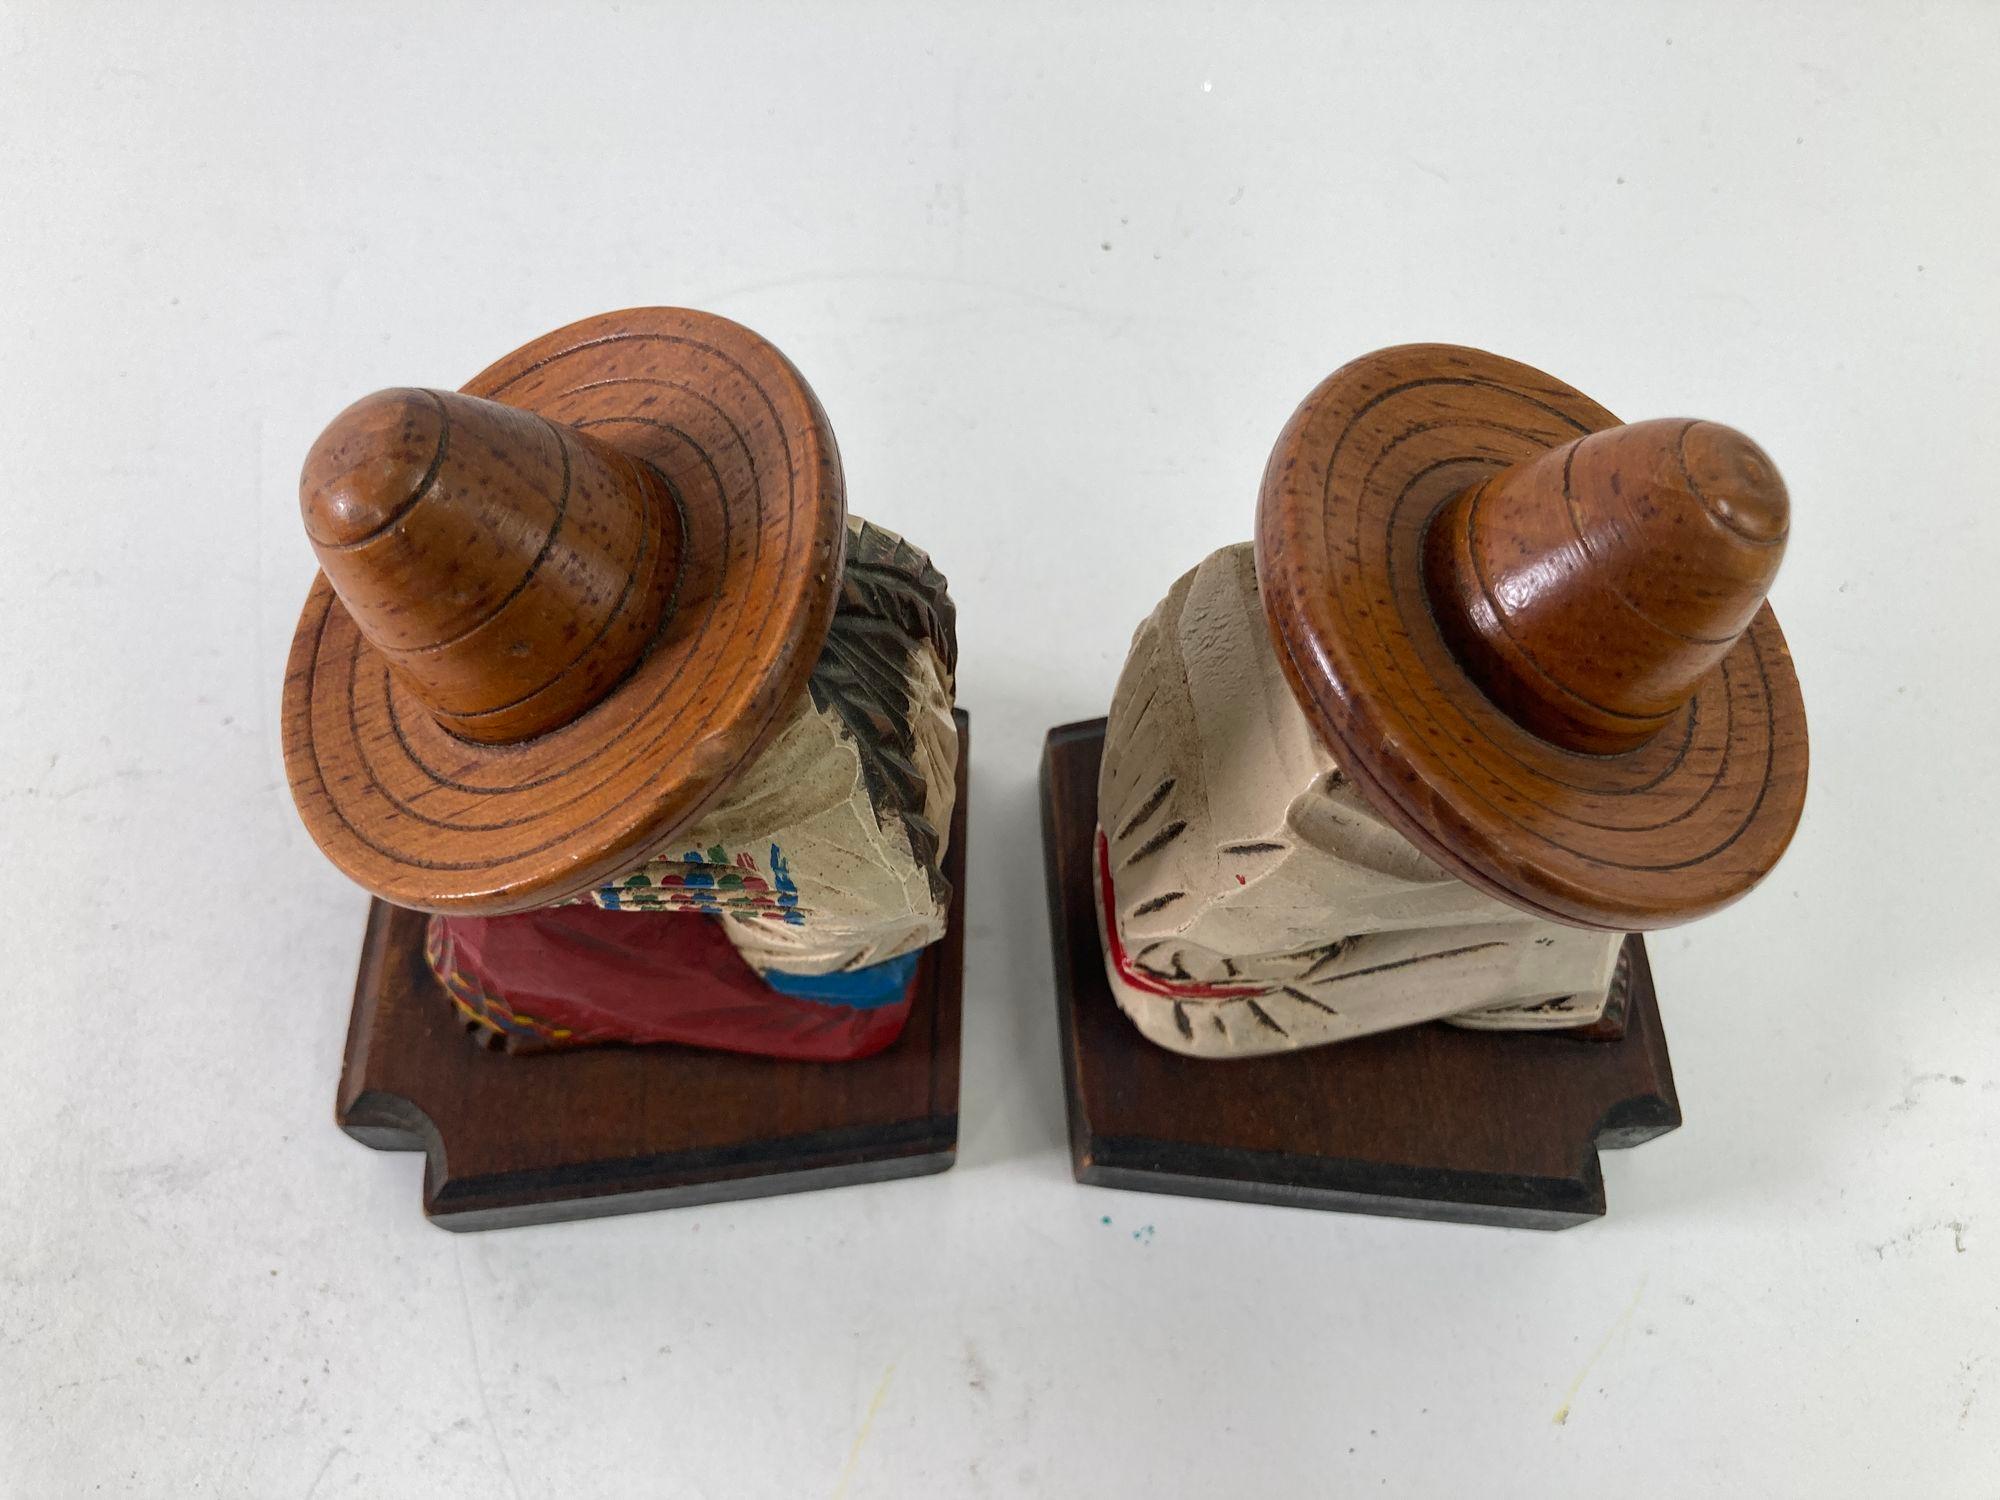 20th Century Vintage 1950s Mexican Carved Wood Sculpture Polychrome Bookends Siesta Folk Art